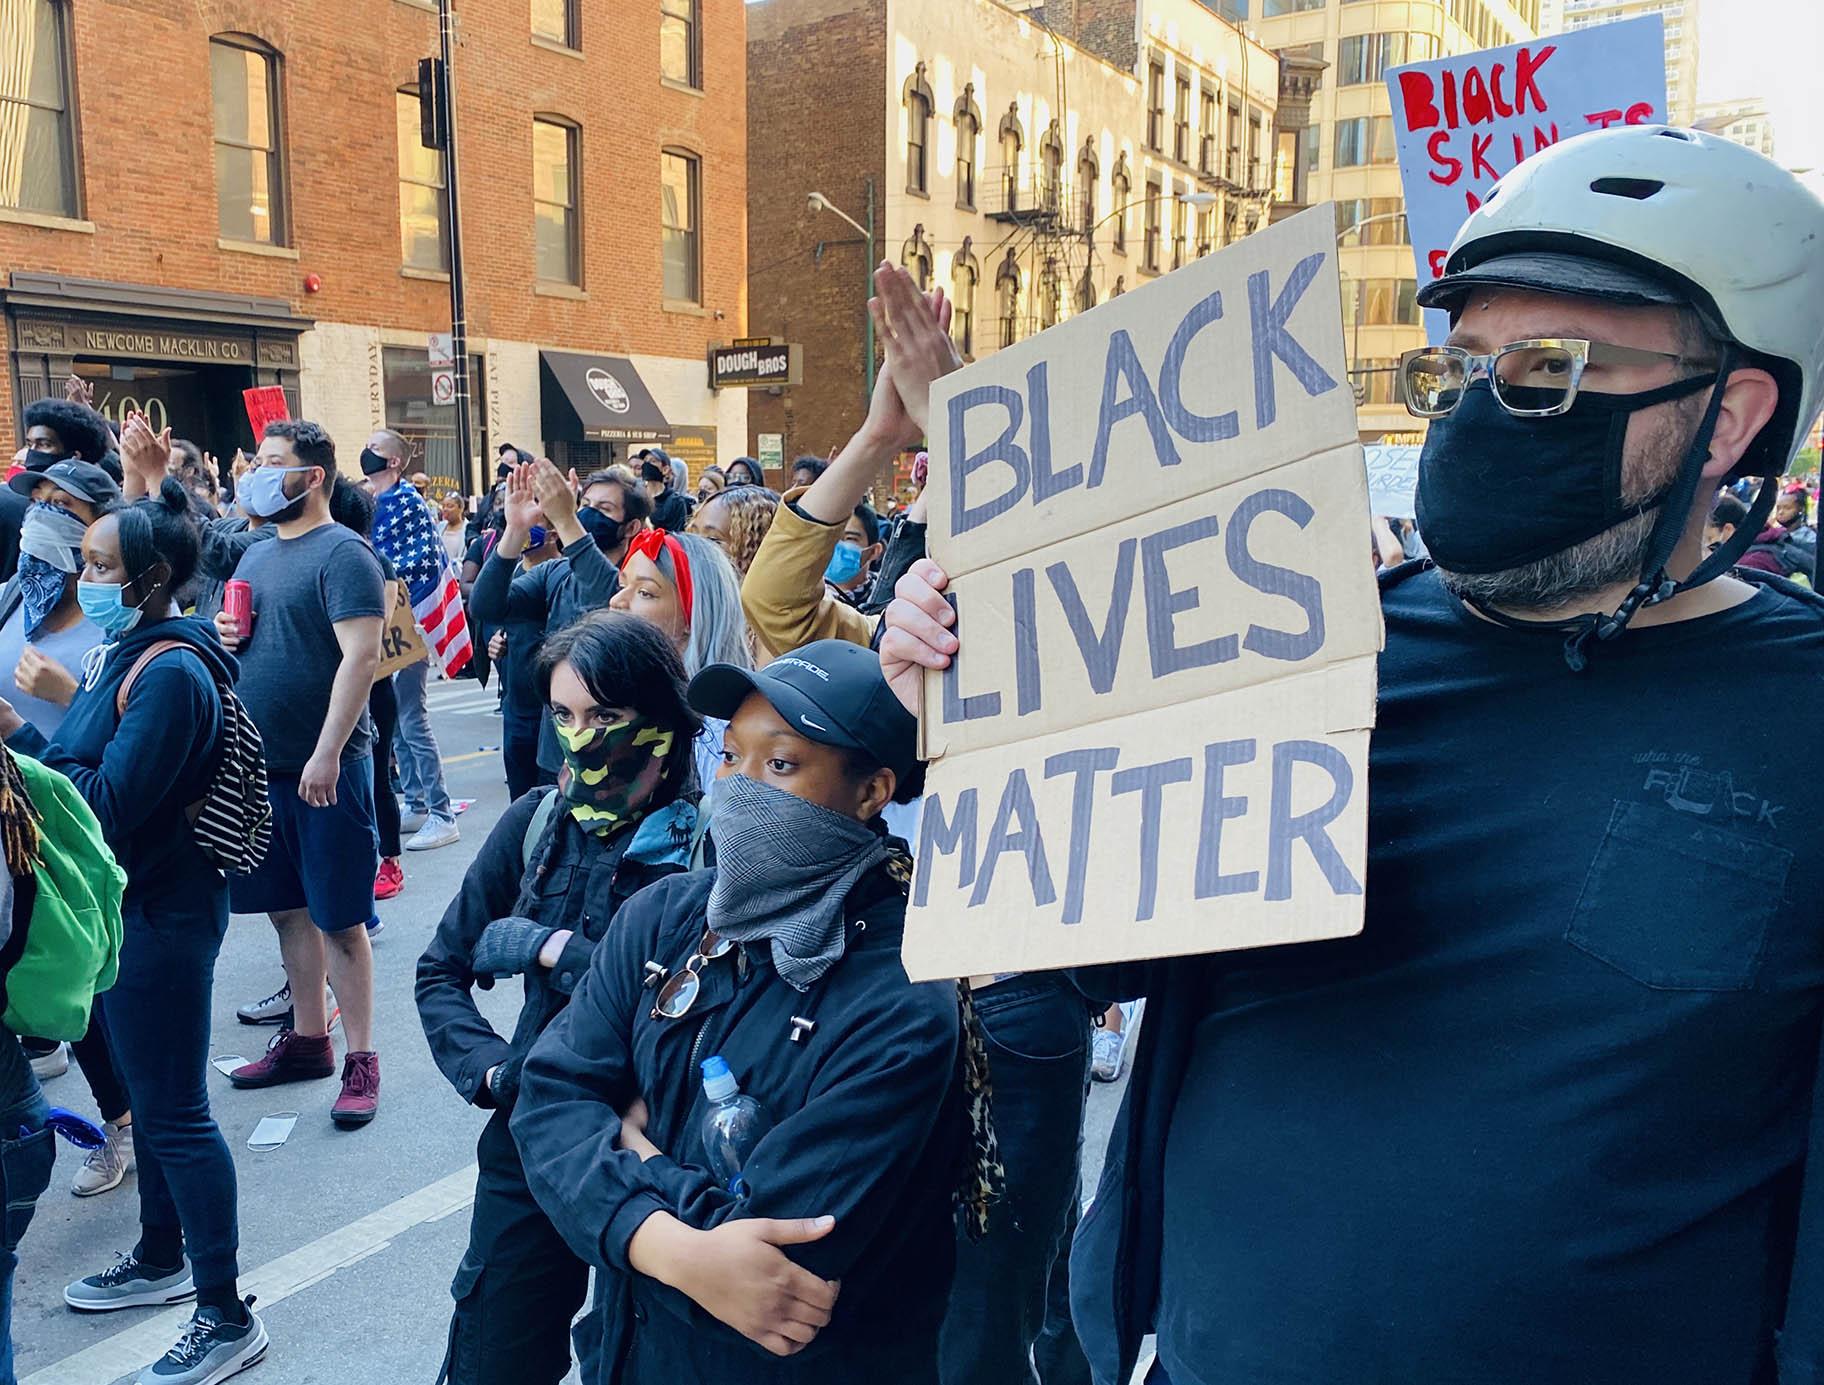 Protesters gather in Chicago on Saturday, May 30, 2020 following the death of George Floyd at the hands of Minneapolis police. There are now several pending attempts to trademark the phrase “Black Lives Matter.” (Hugo Balta / WTTW News)